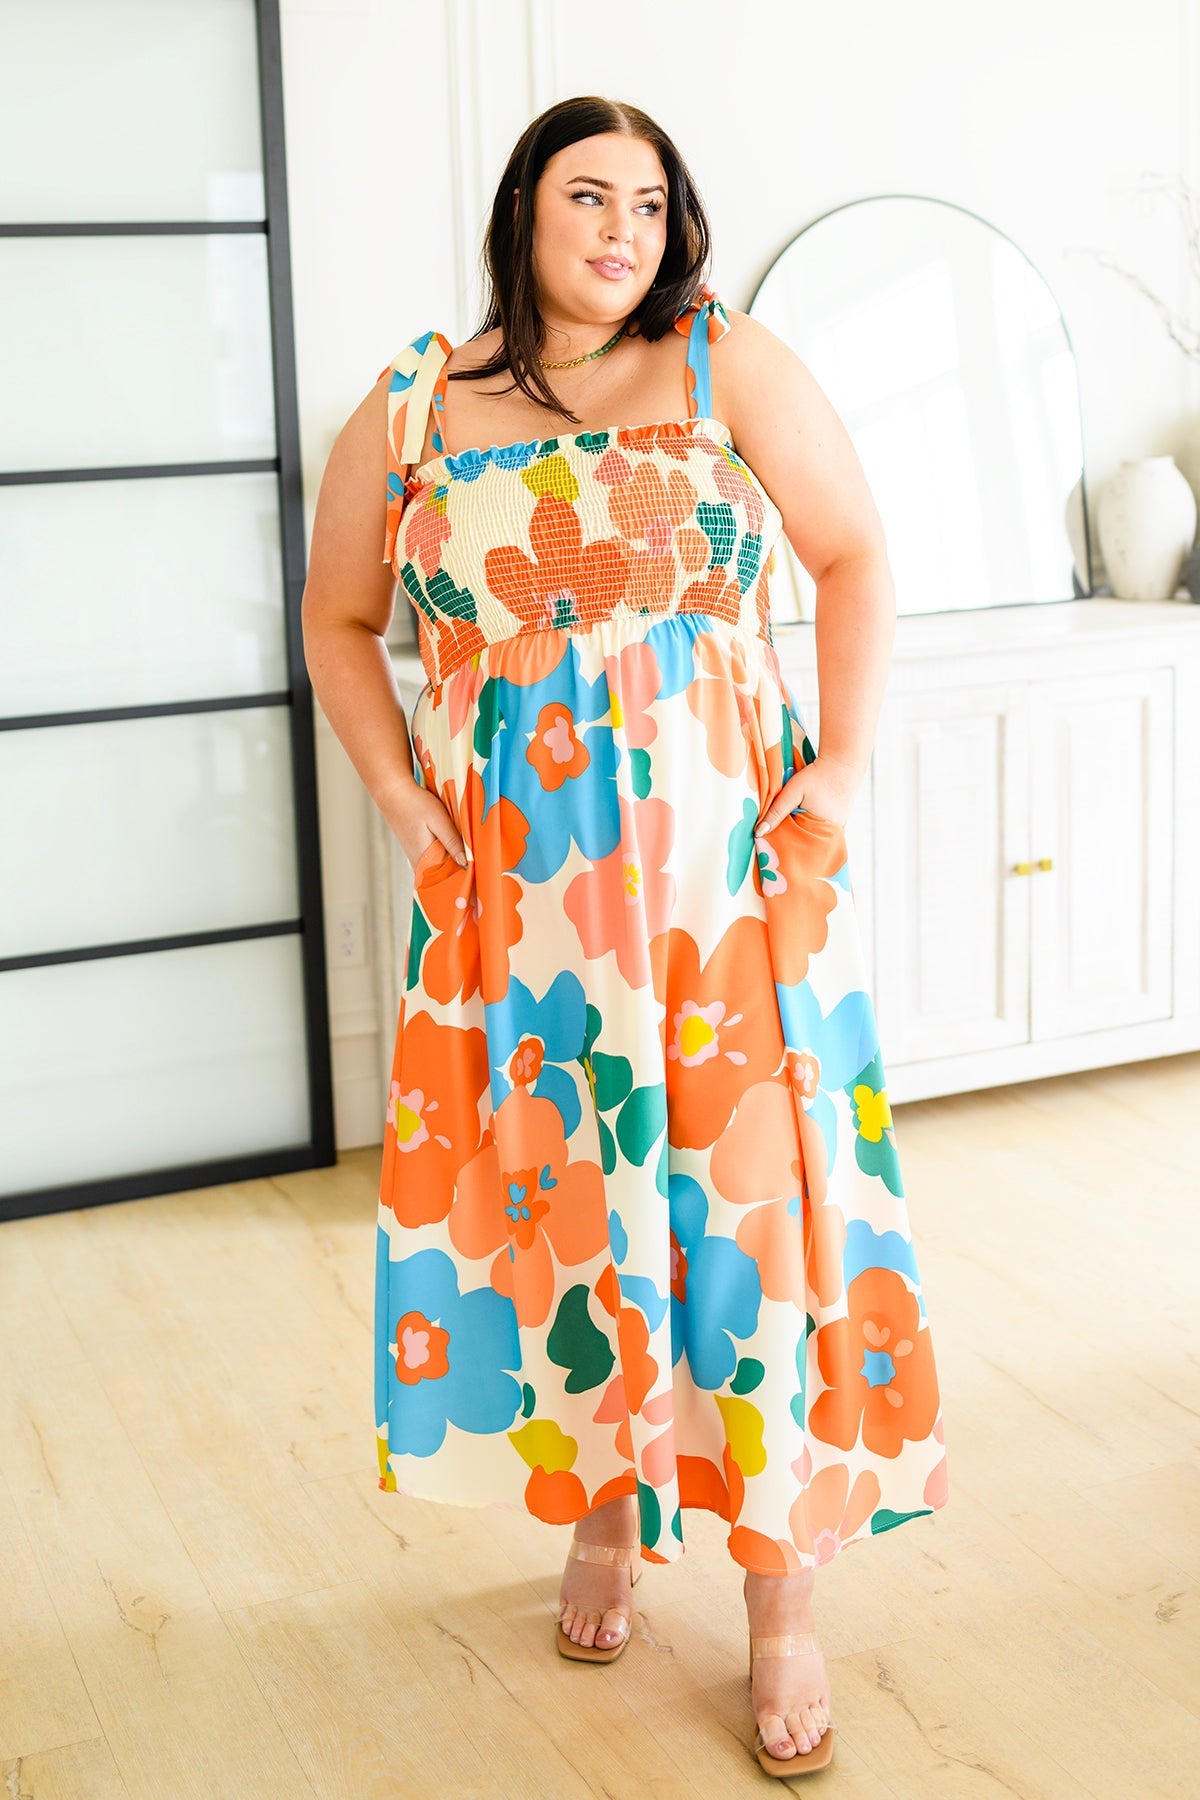 Hawaii Here I Come Floral Maxi Dress, SMALL left!